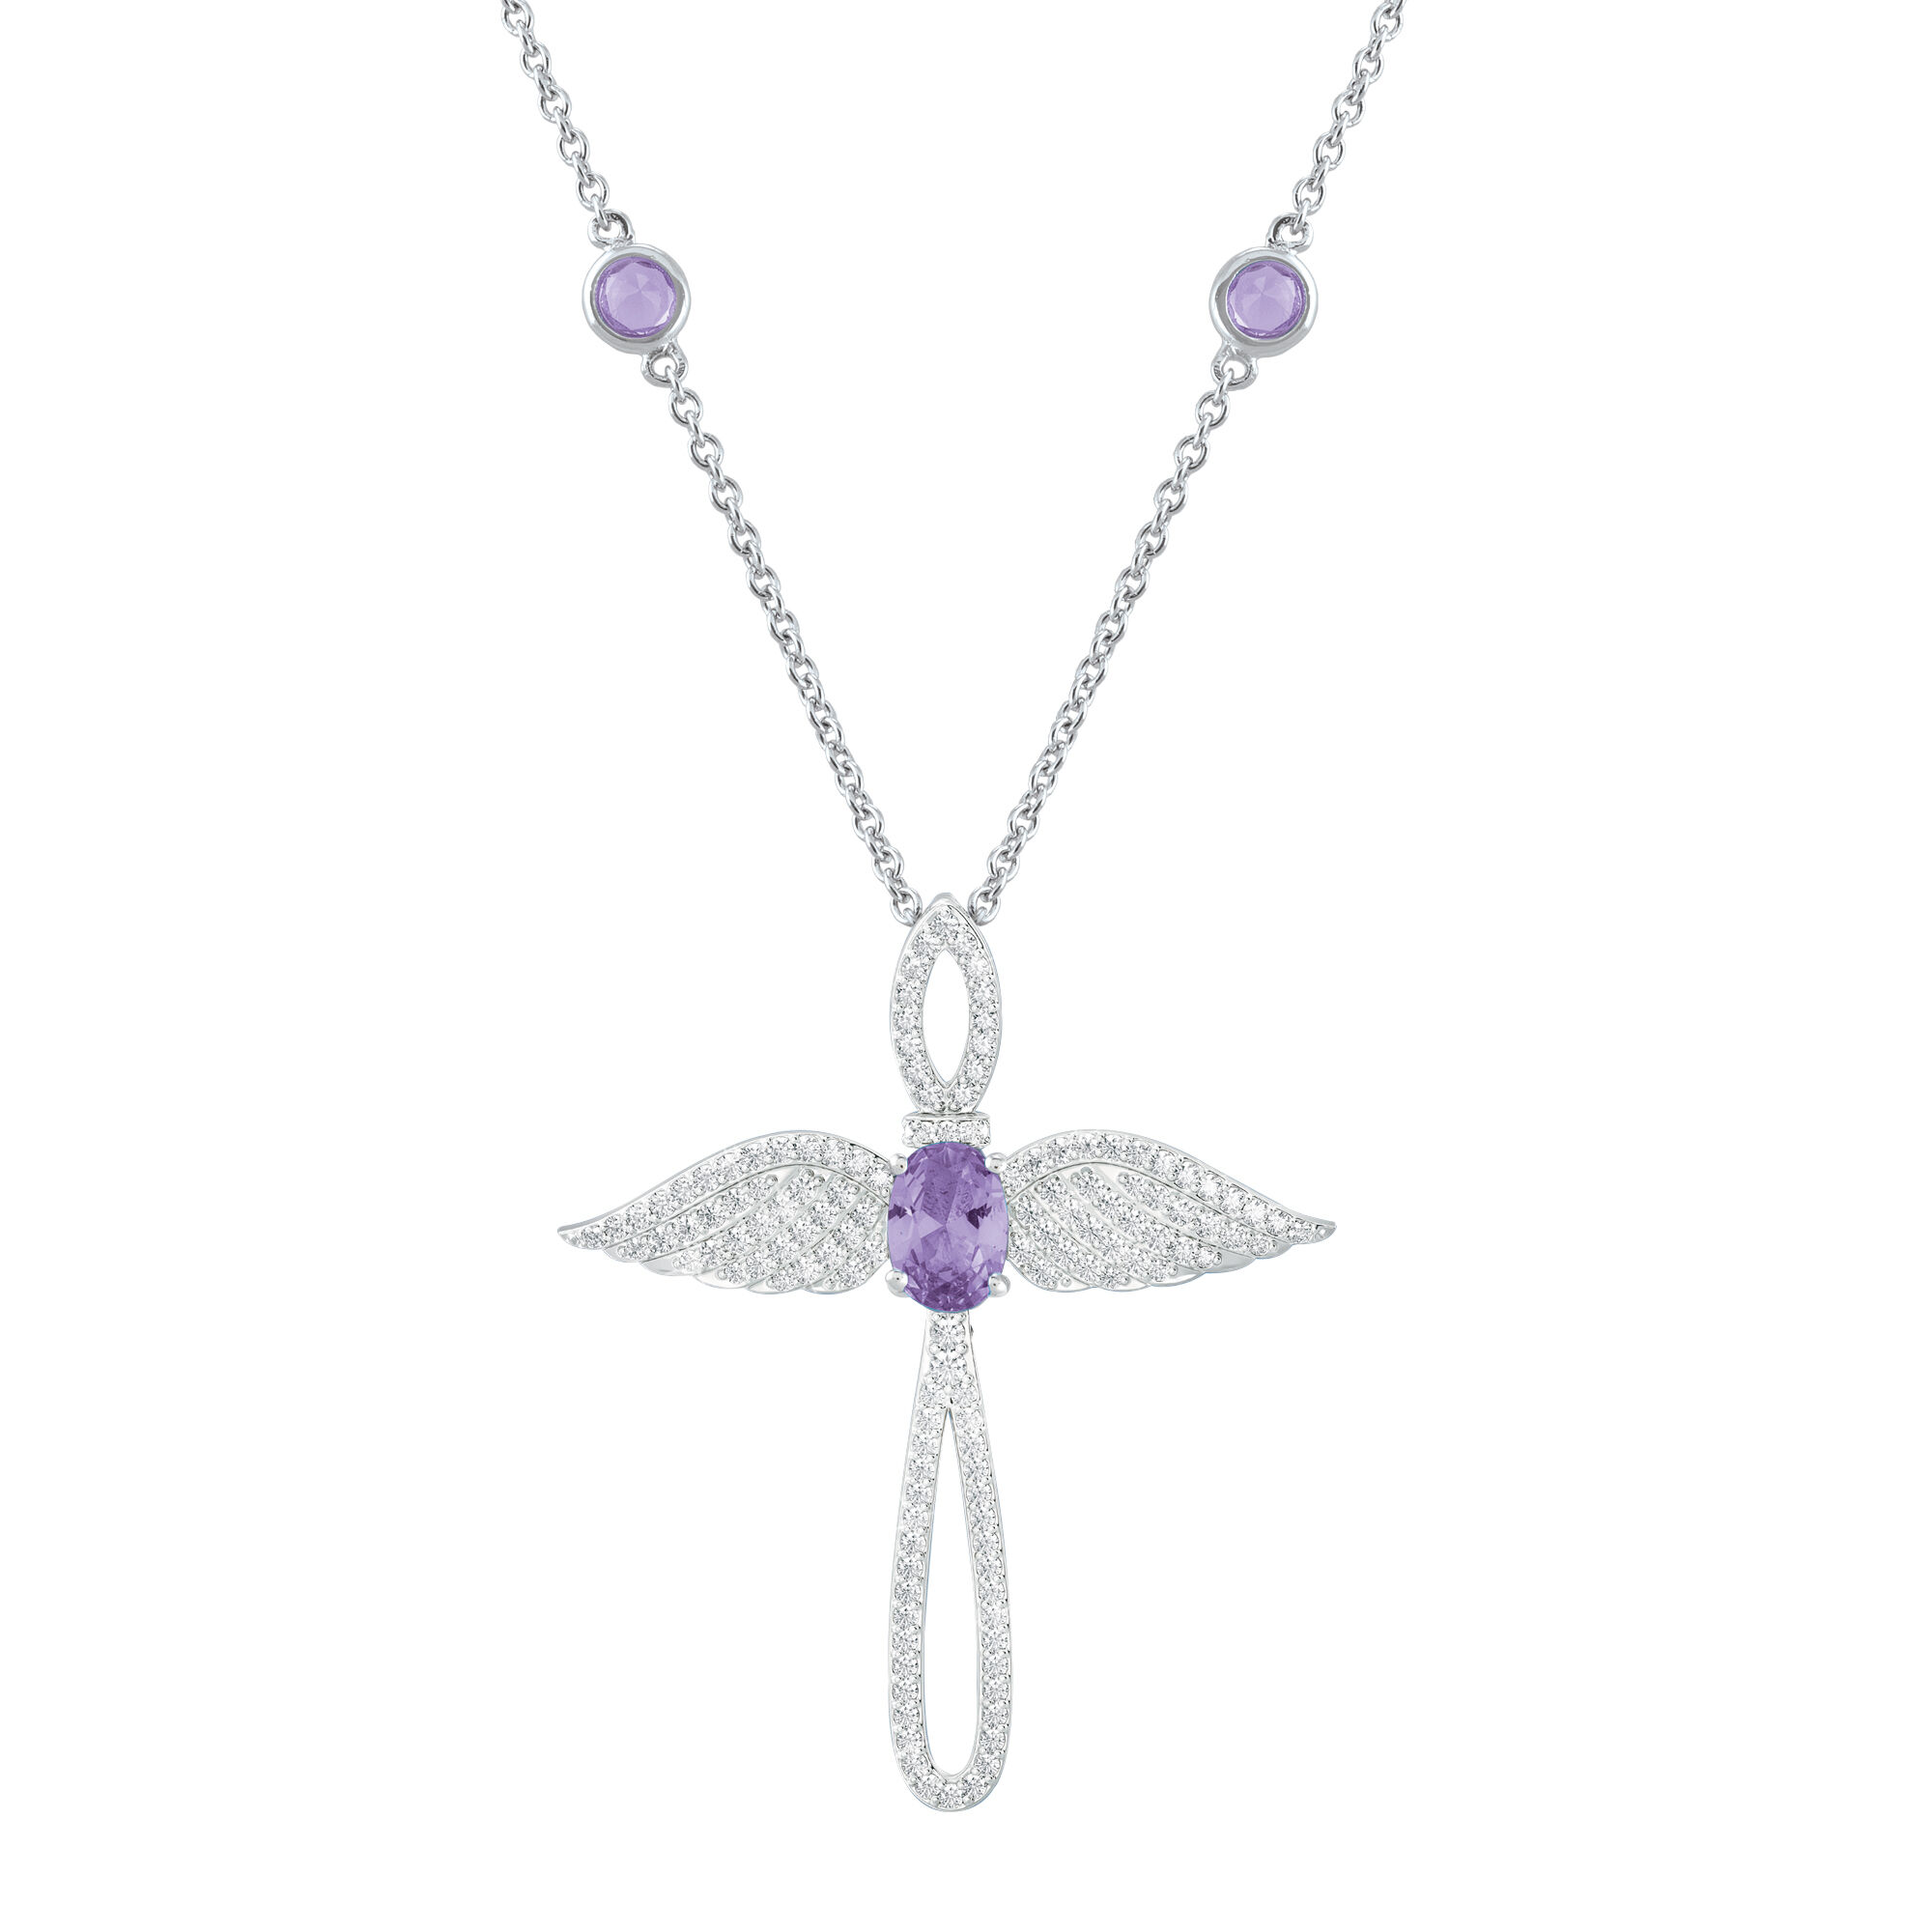 Touched by an Angel Birthstone Necklace 6842 0017 f june